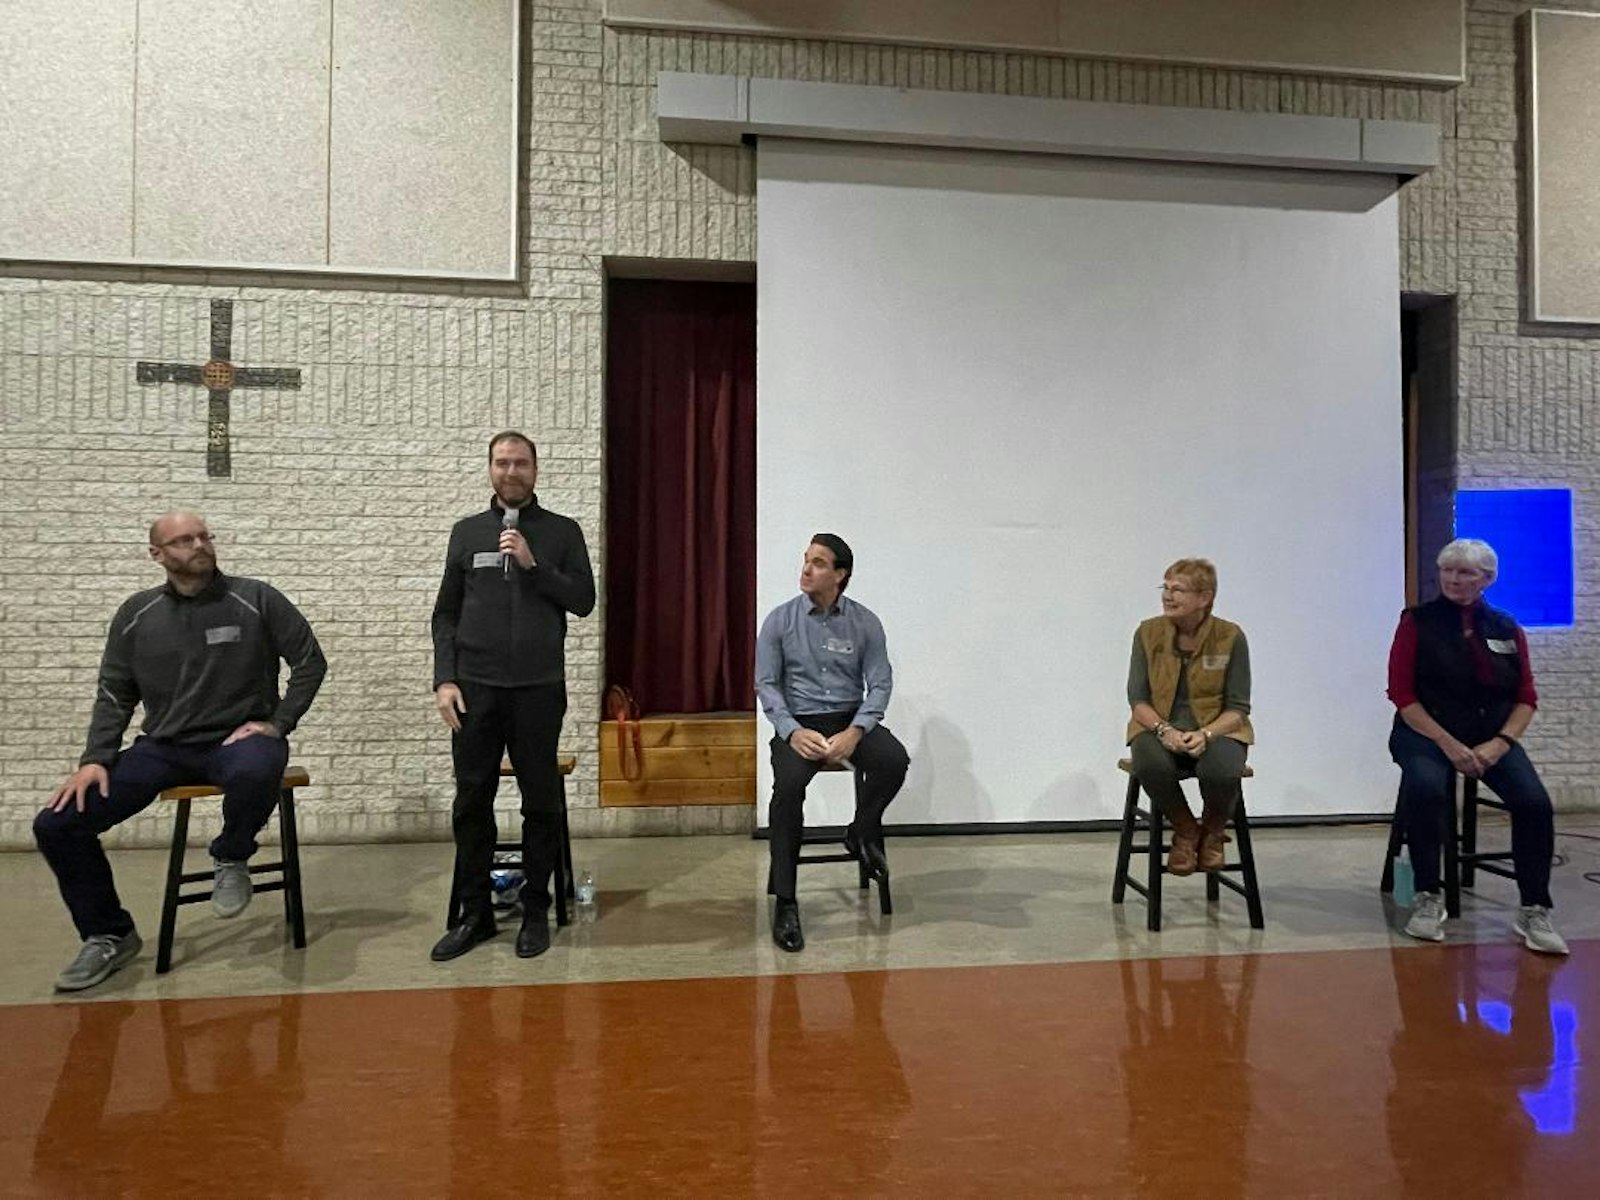 Fr. Grayson Heenan participates in a panel discussion Nov. 11 at St. Andrew Parish in Rochester focused on faith and sports. (Jim Dudley | Special to Detroit Catholic)